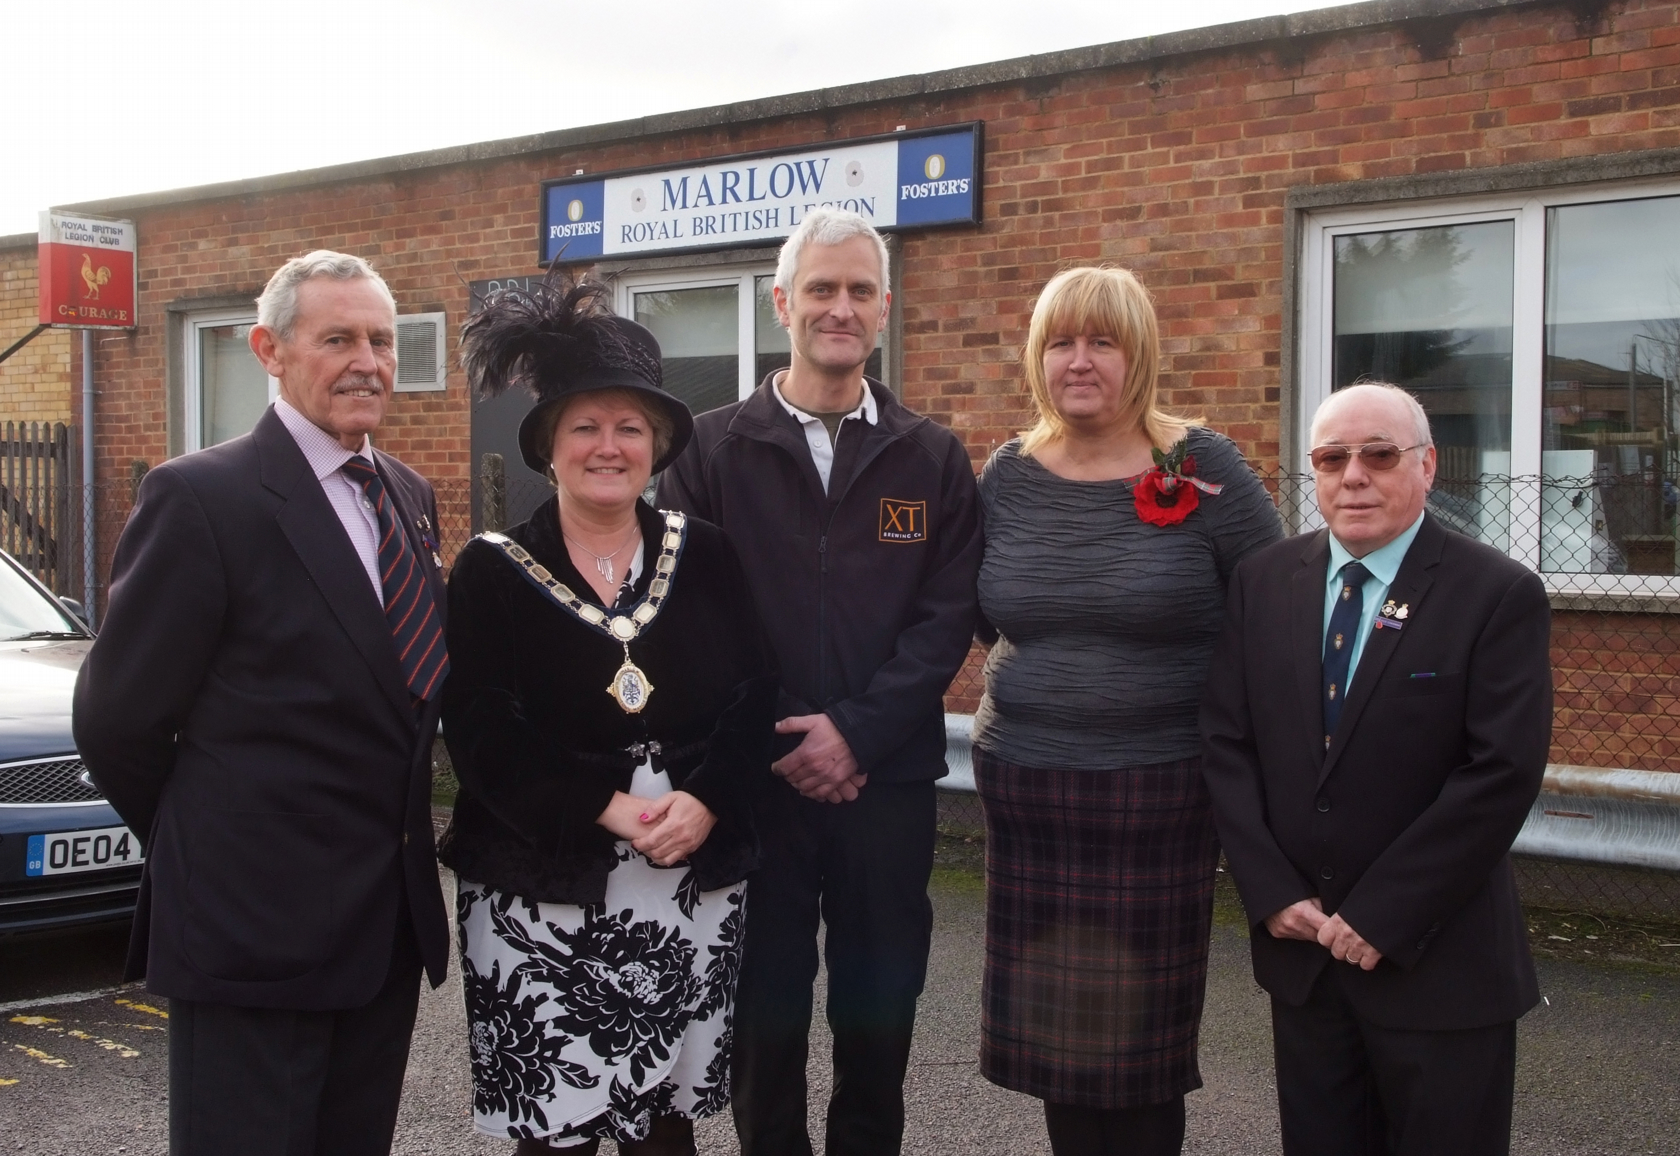 PICTURED: John Chapman MBE outside the Royal British Legion 